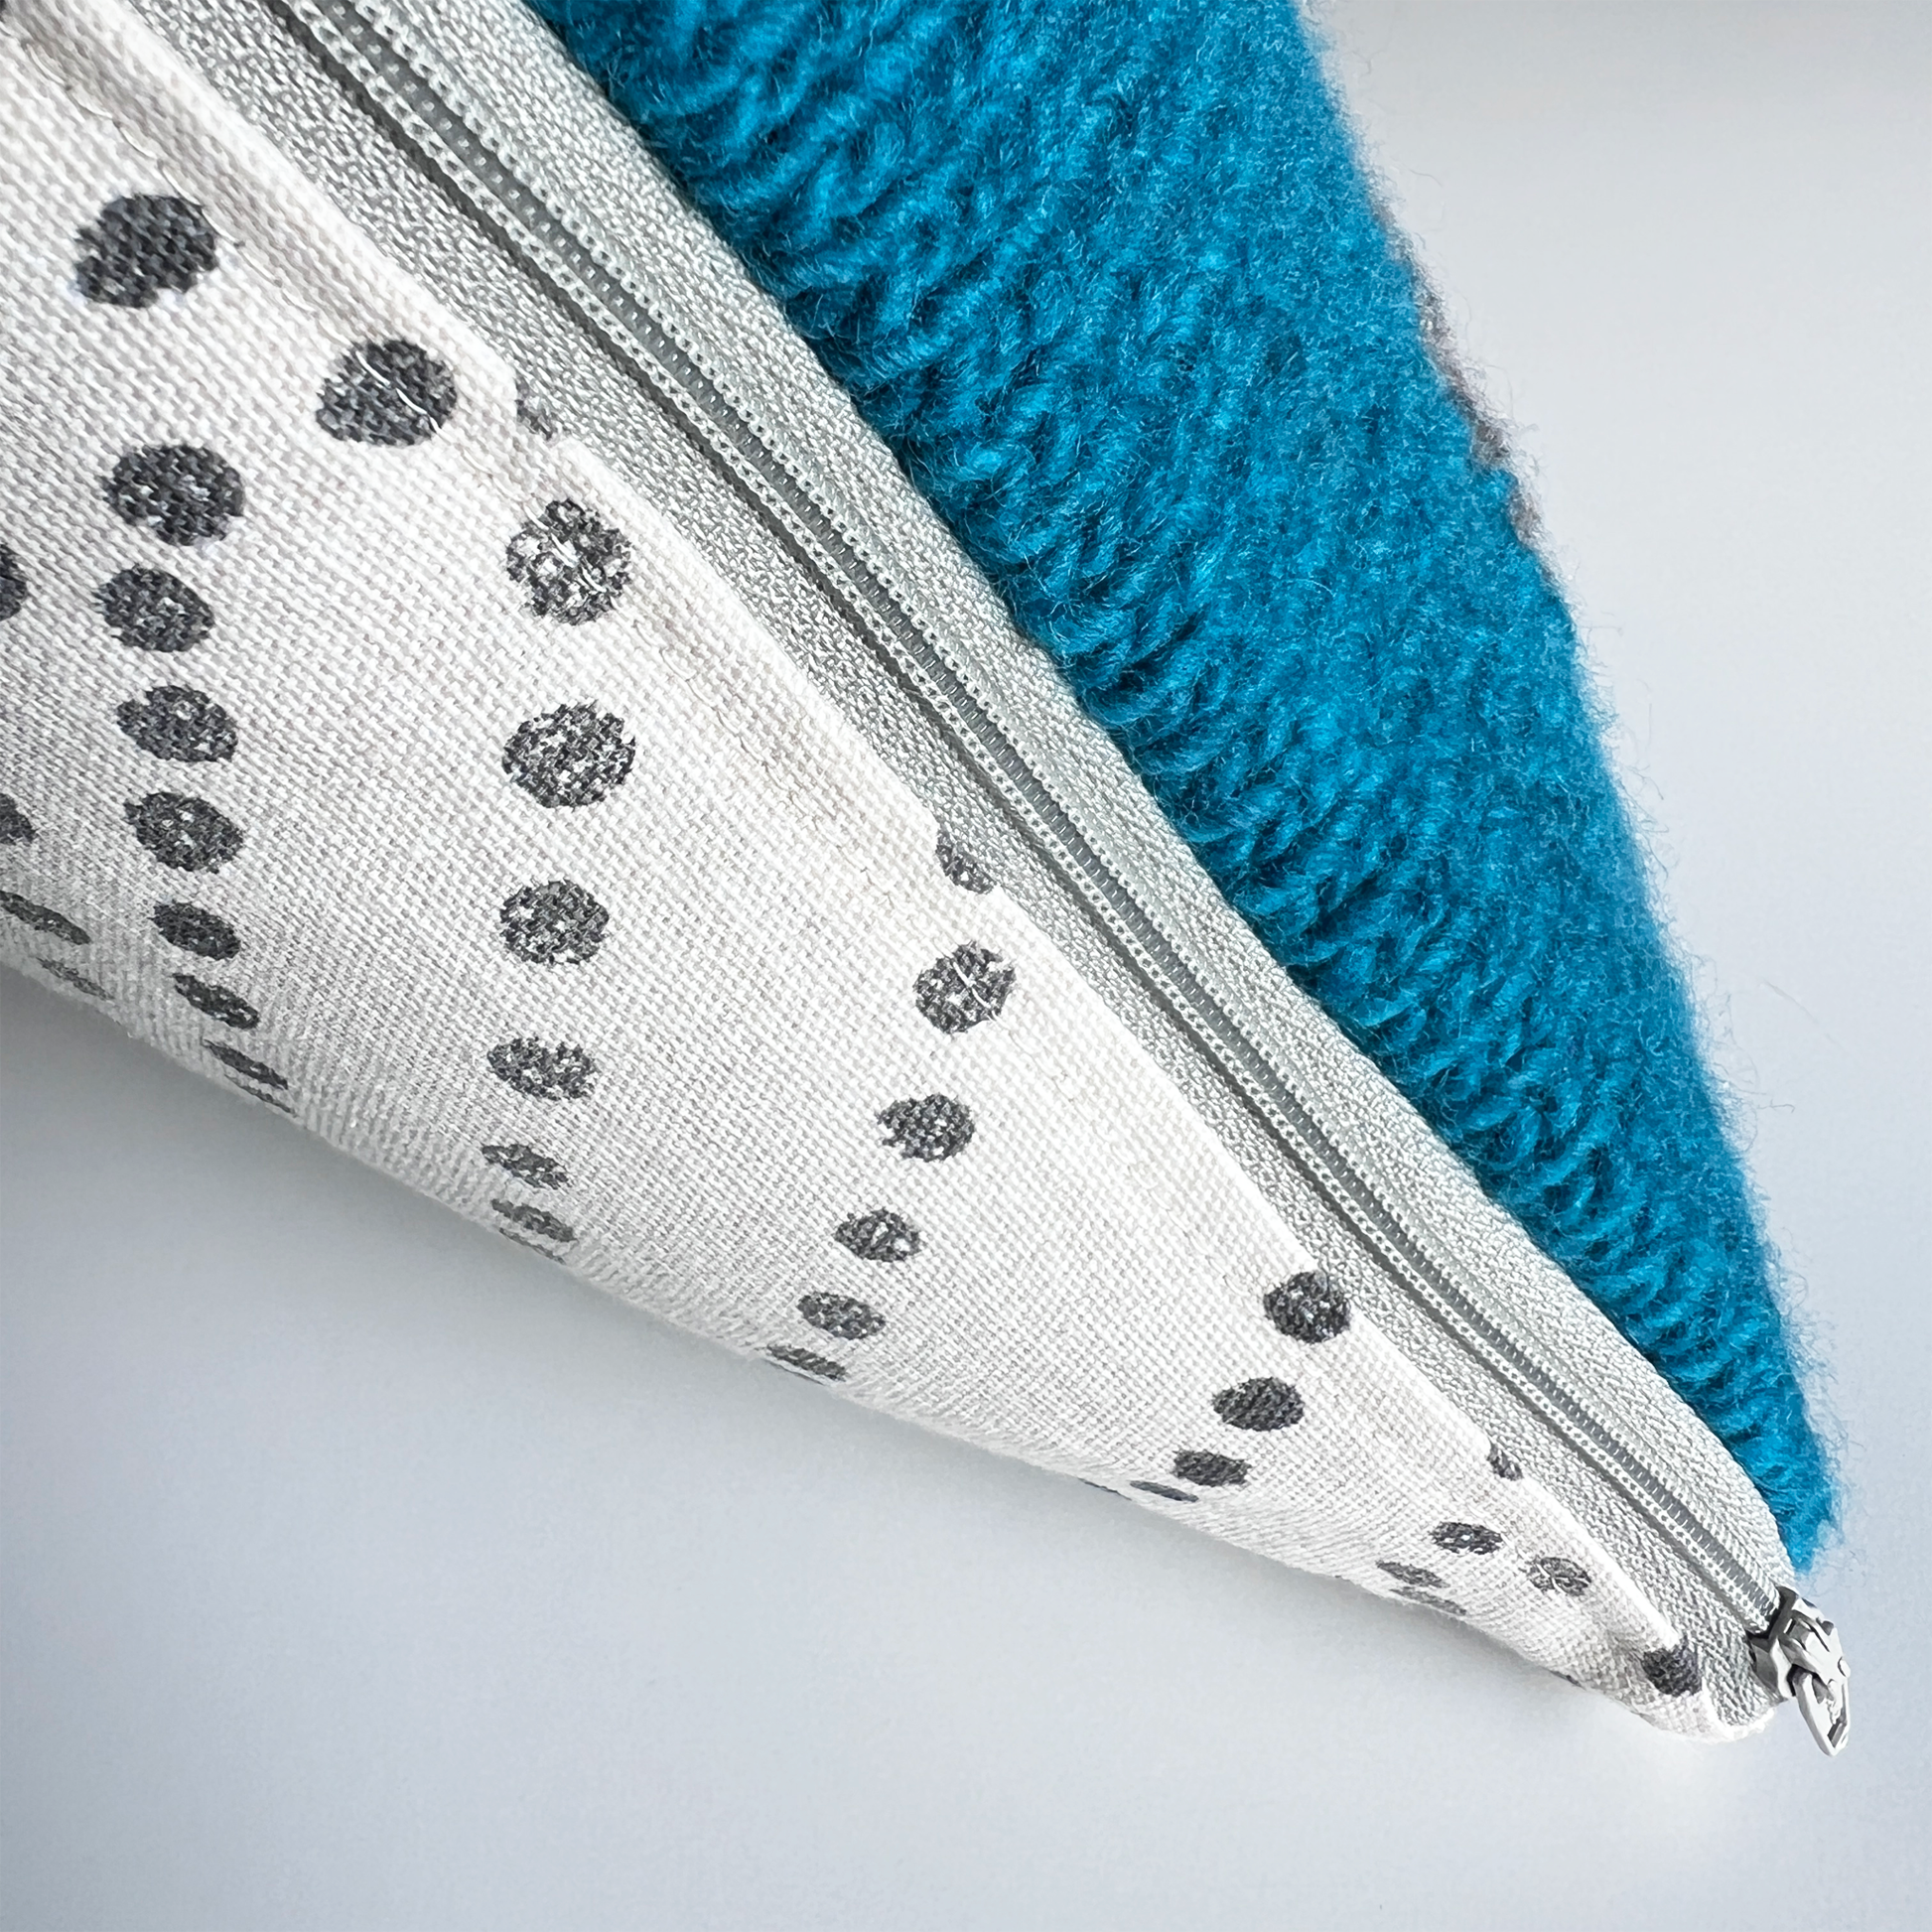 A complementary light gray zipper makes this pillow cover easy to remove for spot cleaning.